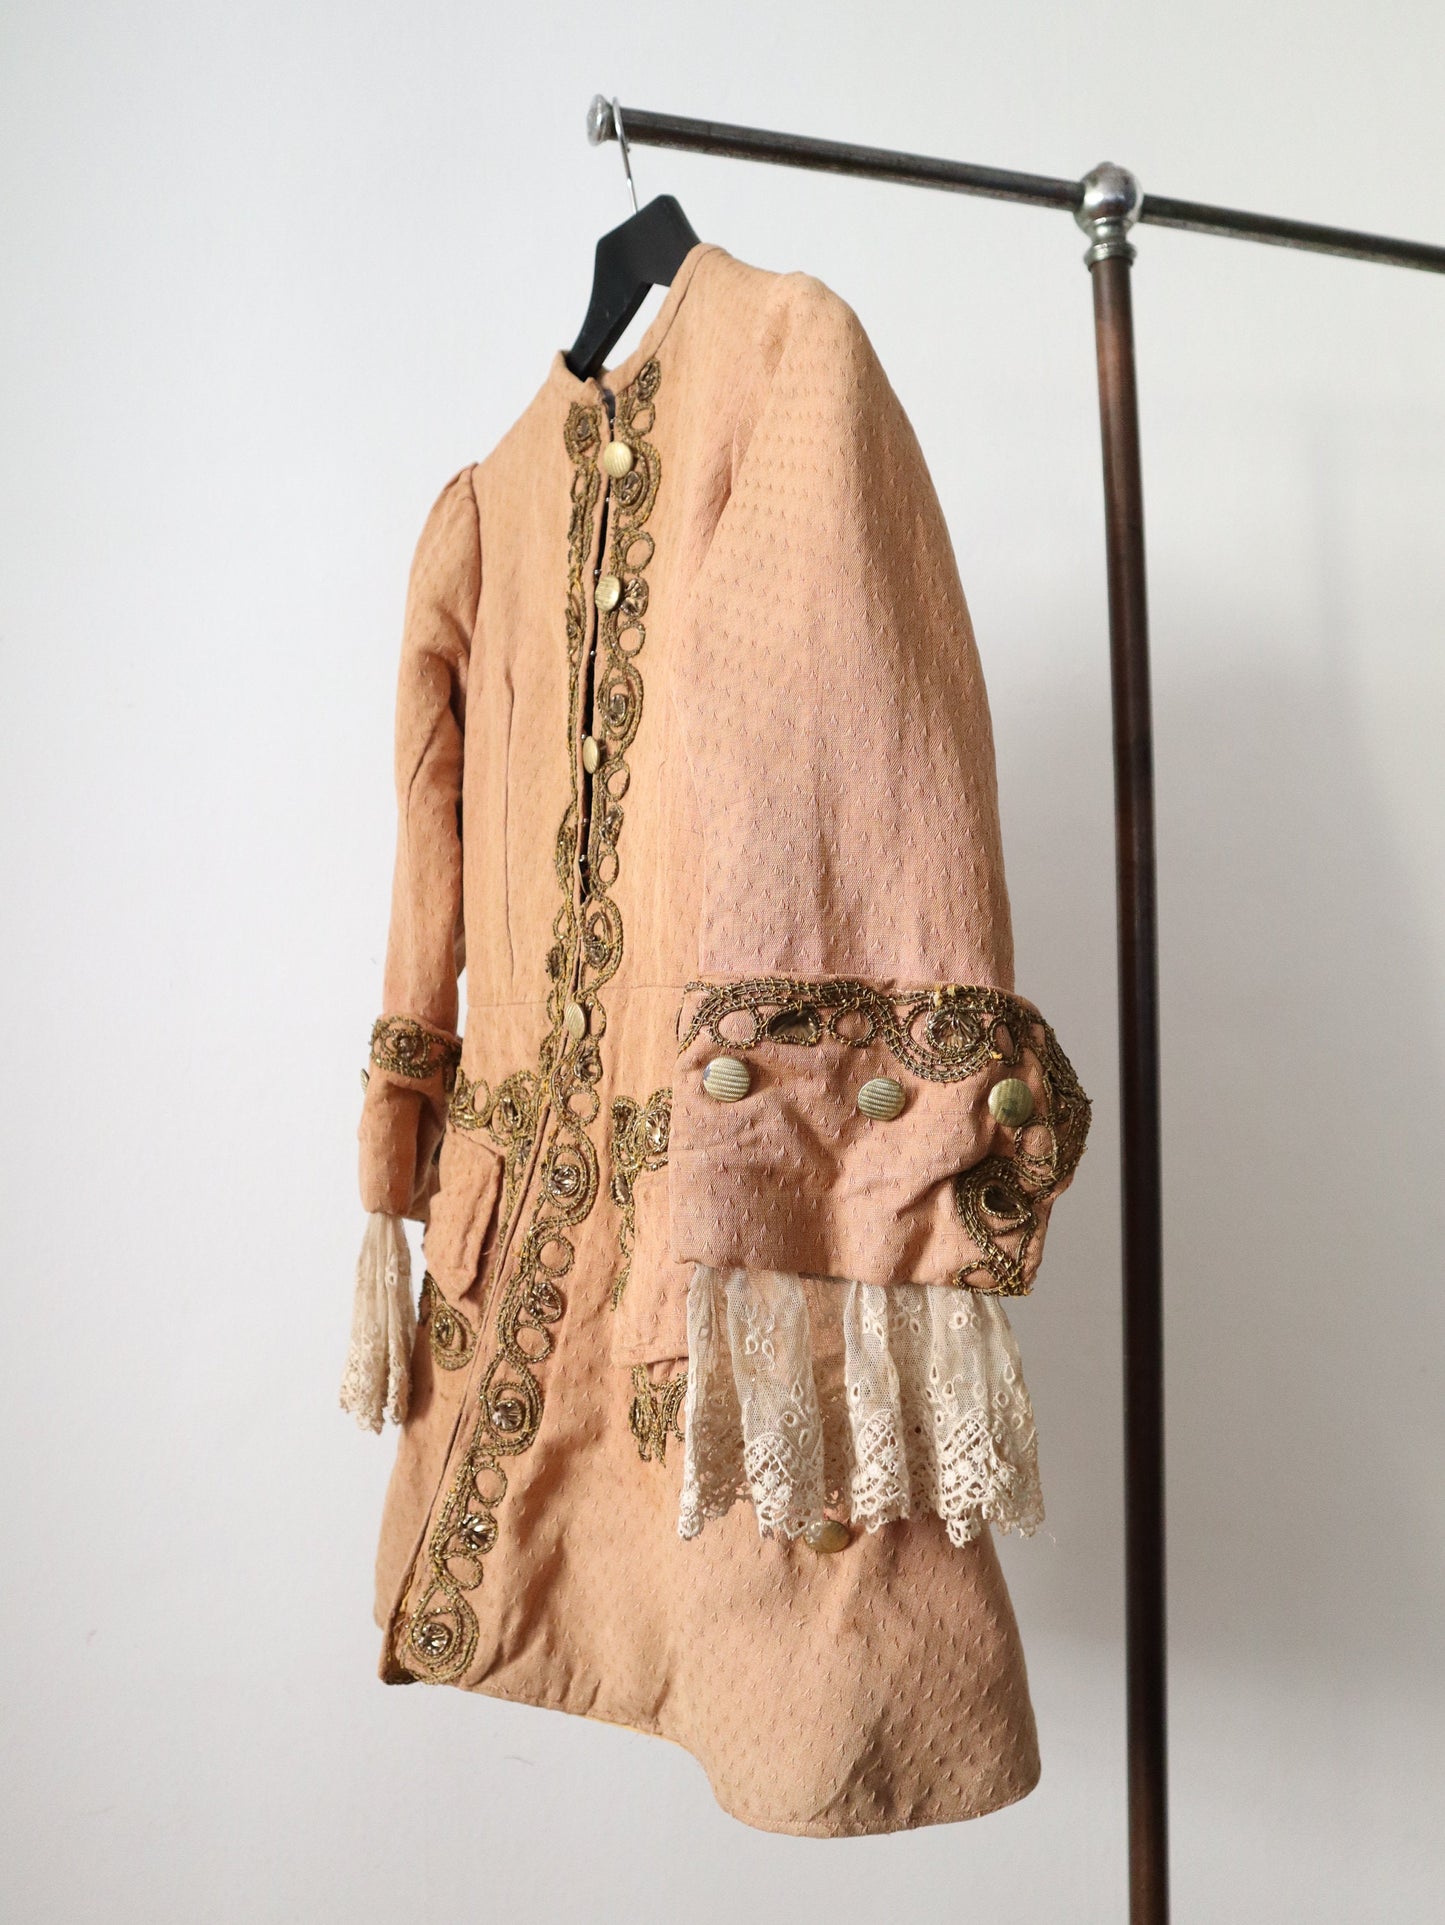 Antique French Theatre Costume Frock Coat Peach Cotton Woven Lave Teim Gold Metal Thread Embellishment 18th Century Style